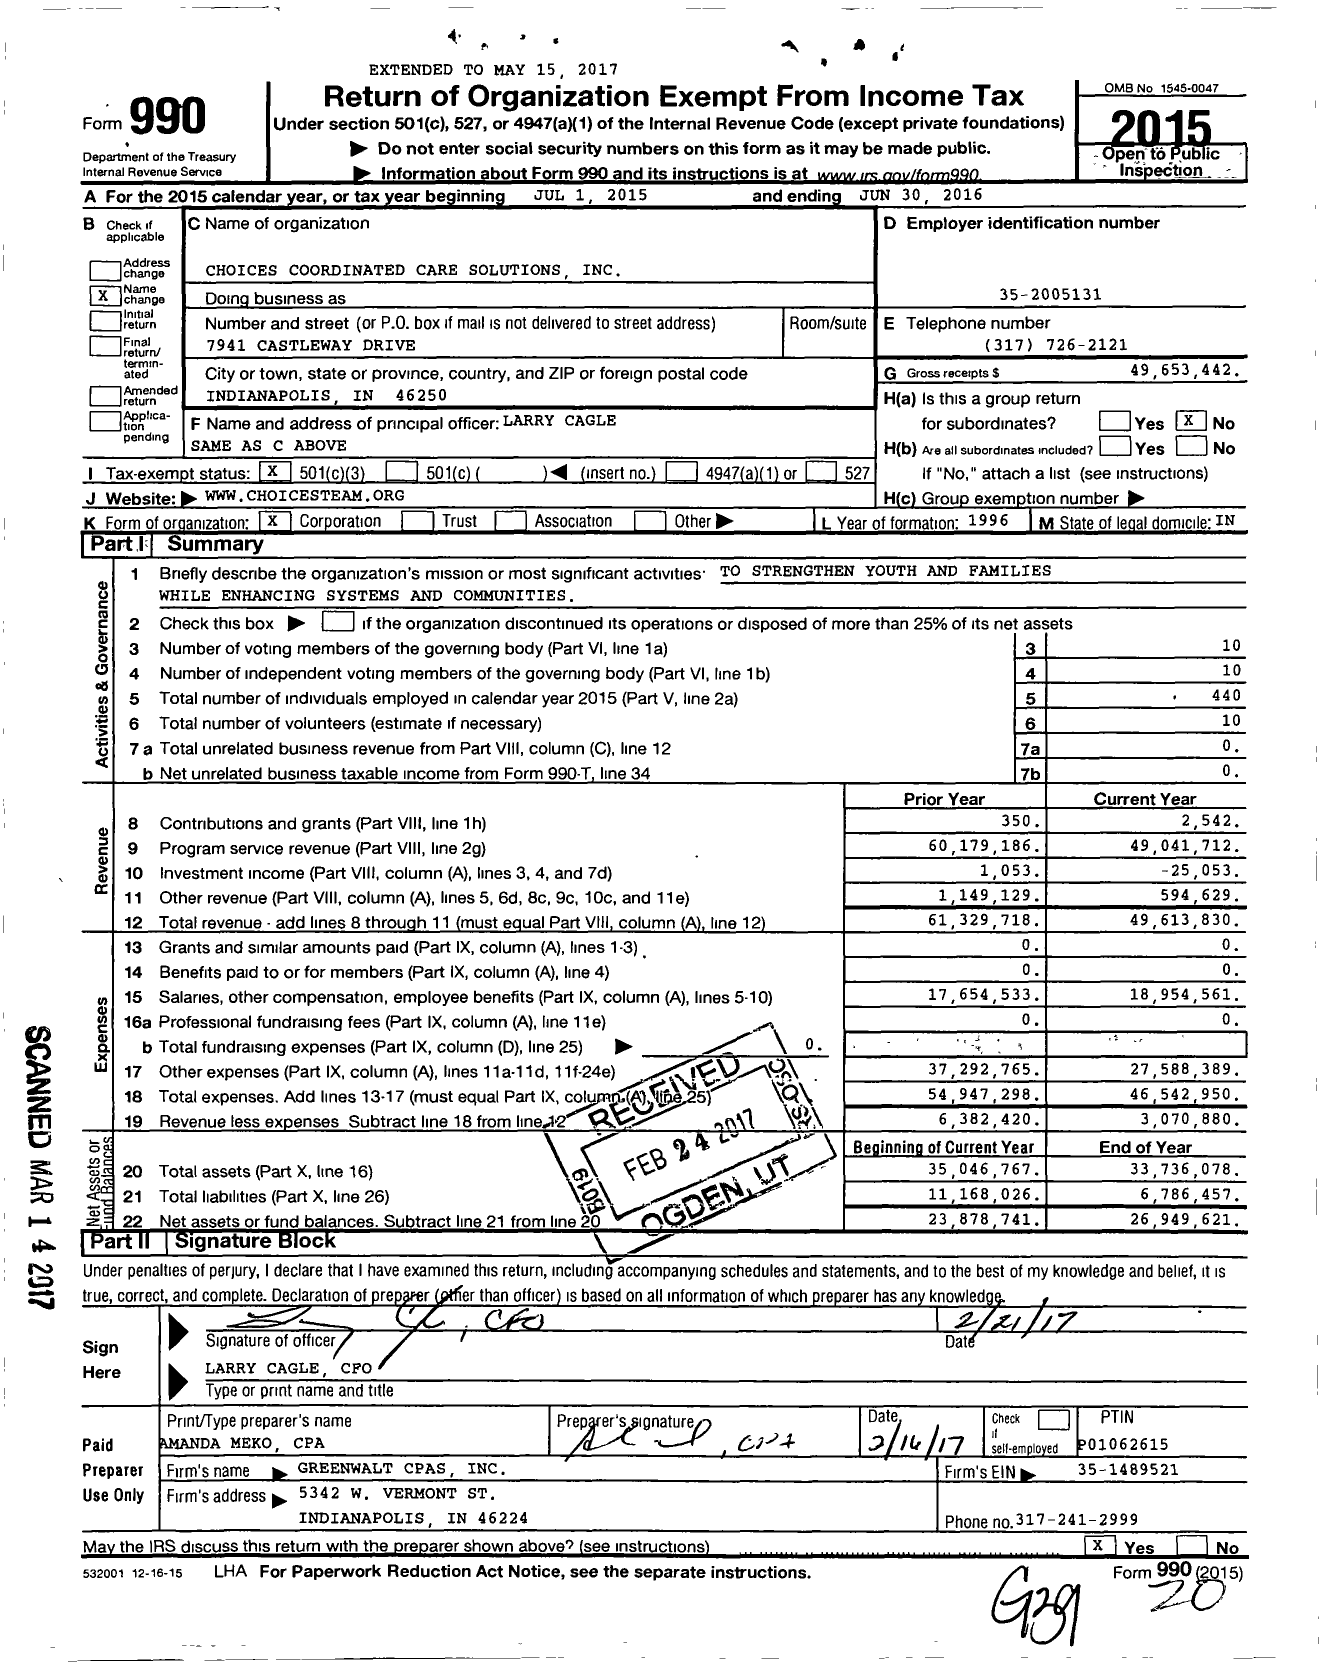 Image of first page of 2015 Form 990 for Choices Coordinated Care Solutions